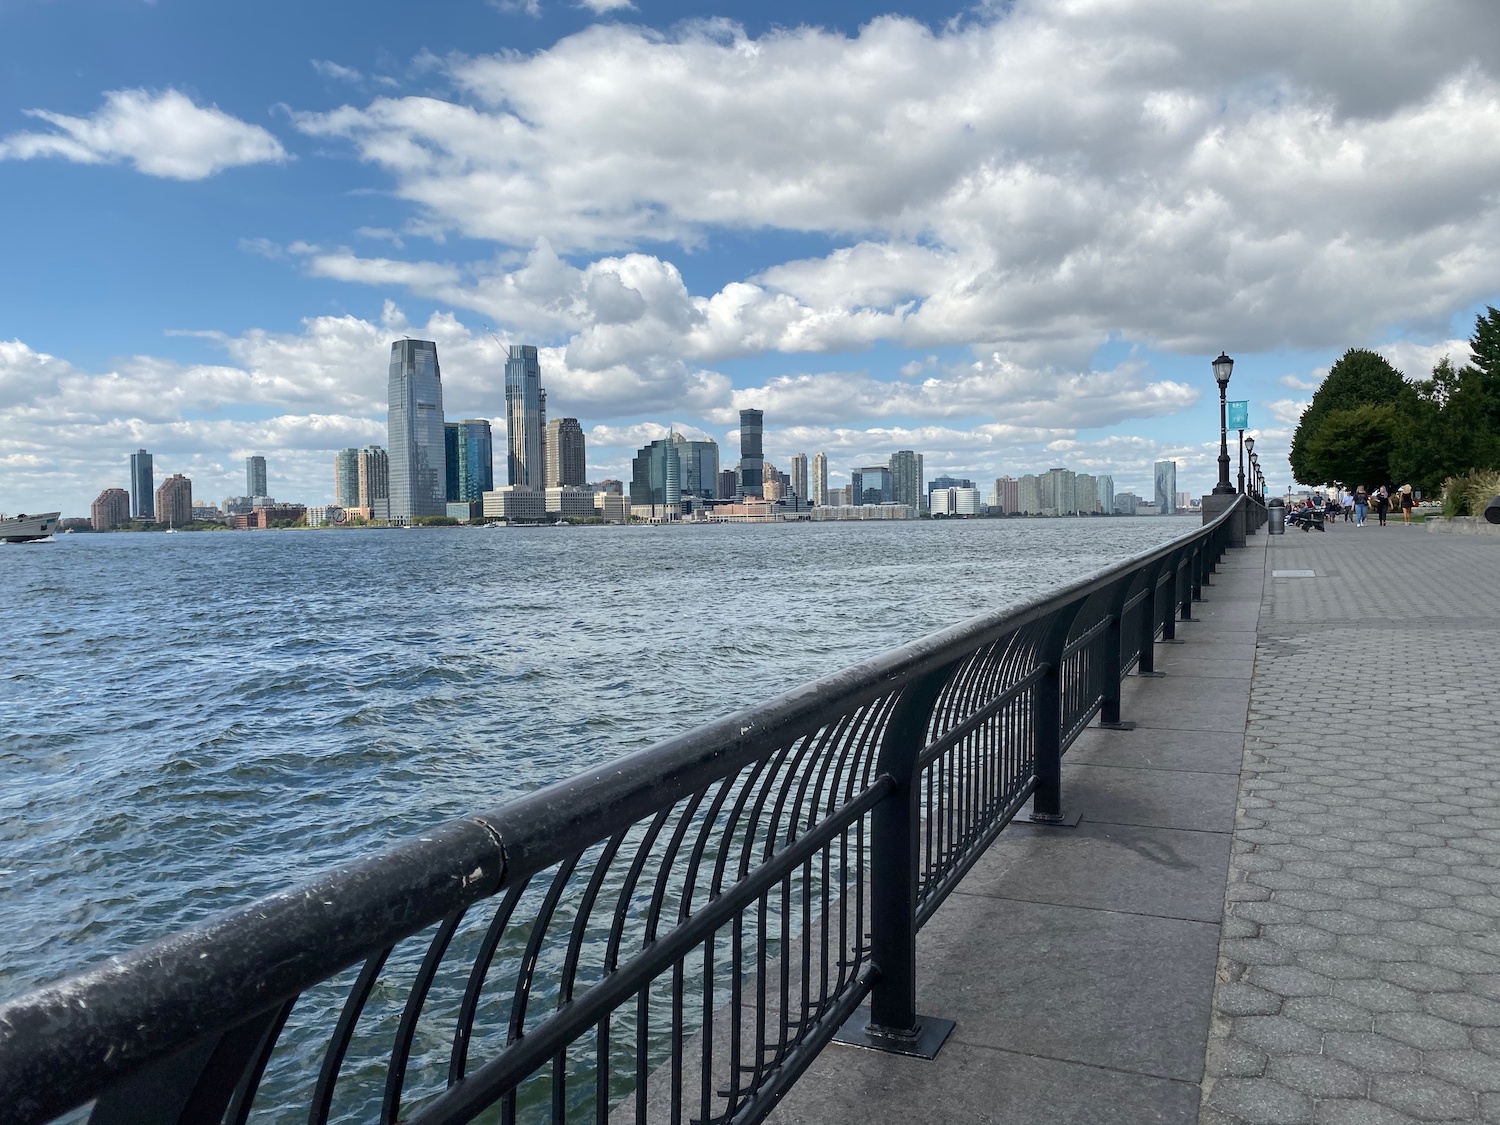 iphone 11 pro review daytime photo sample wide angle 1